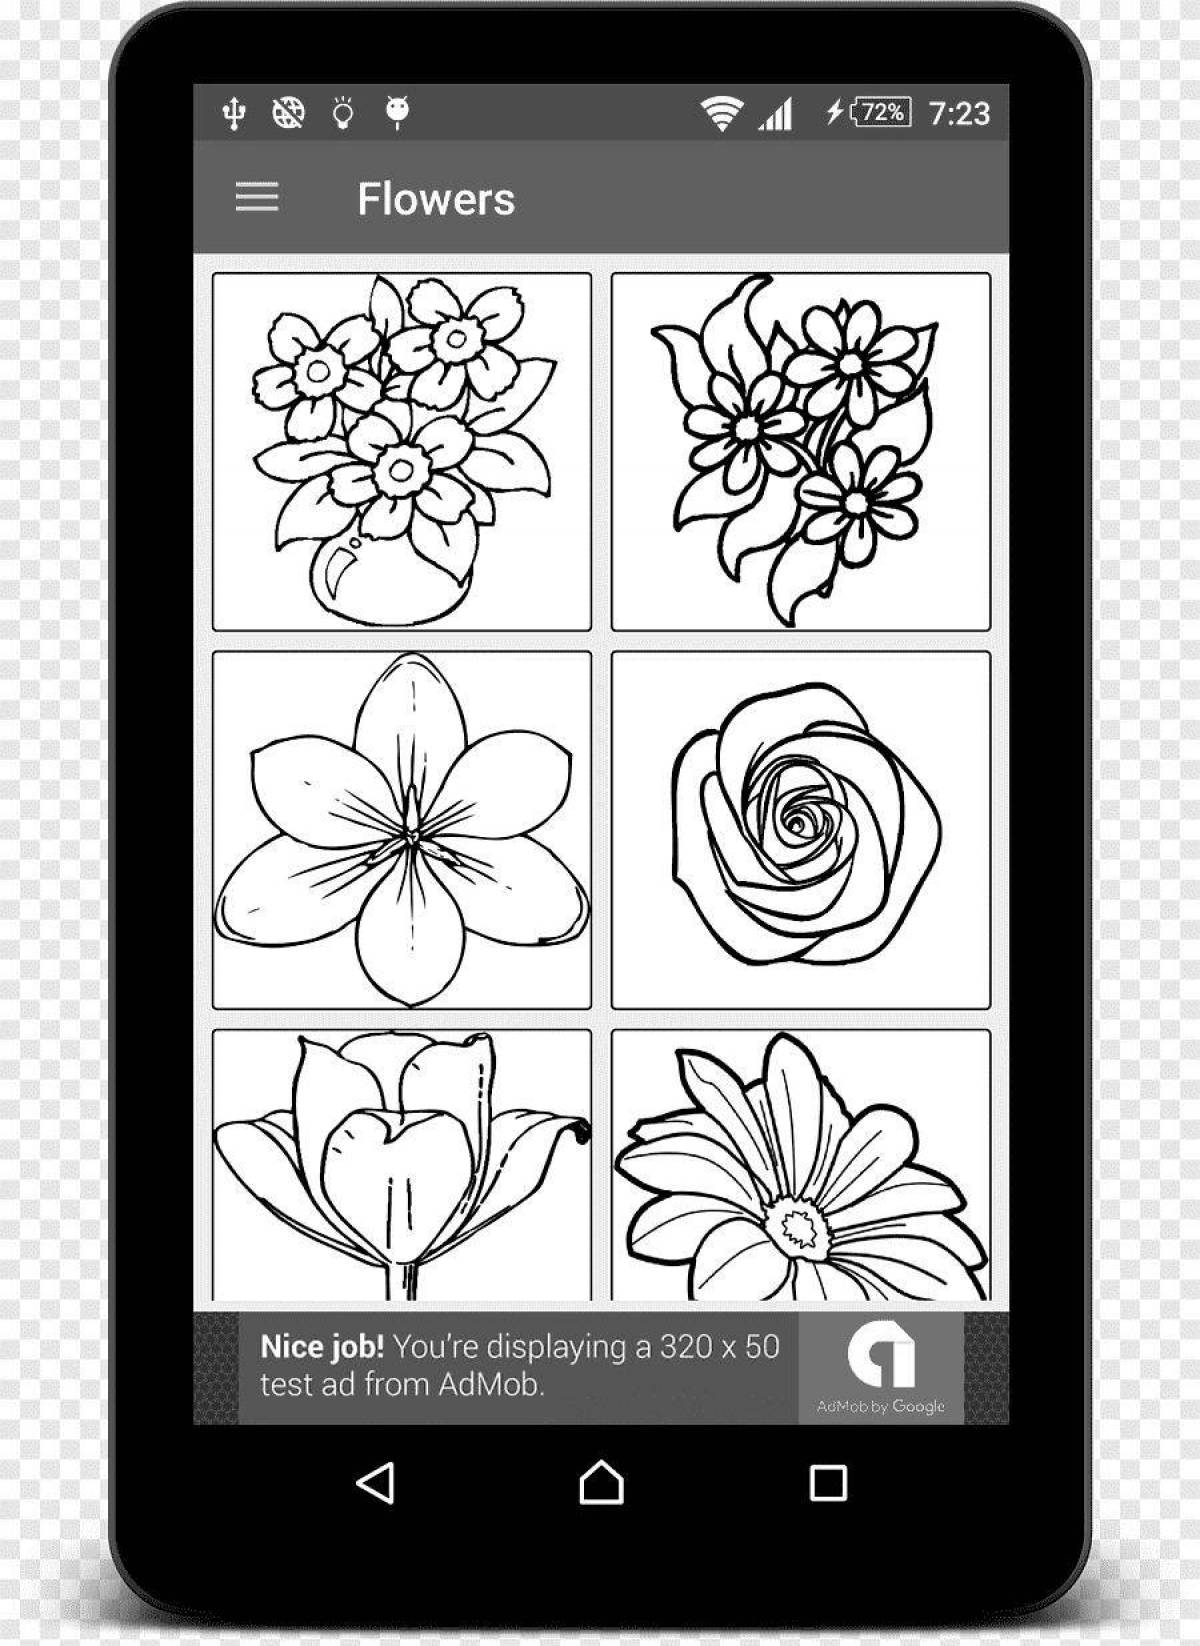 Coloring page for android phone